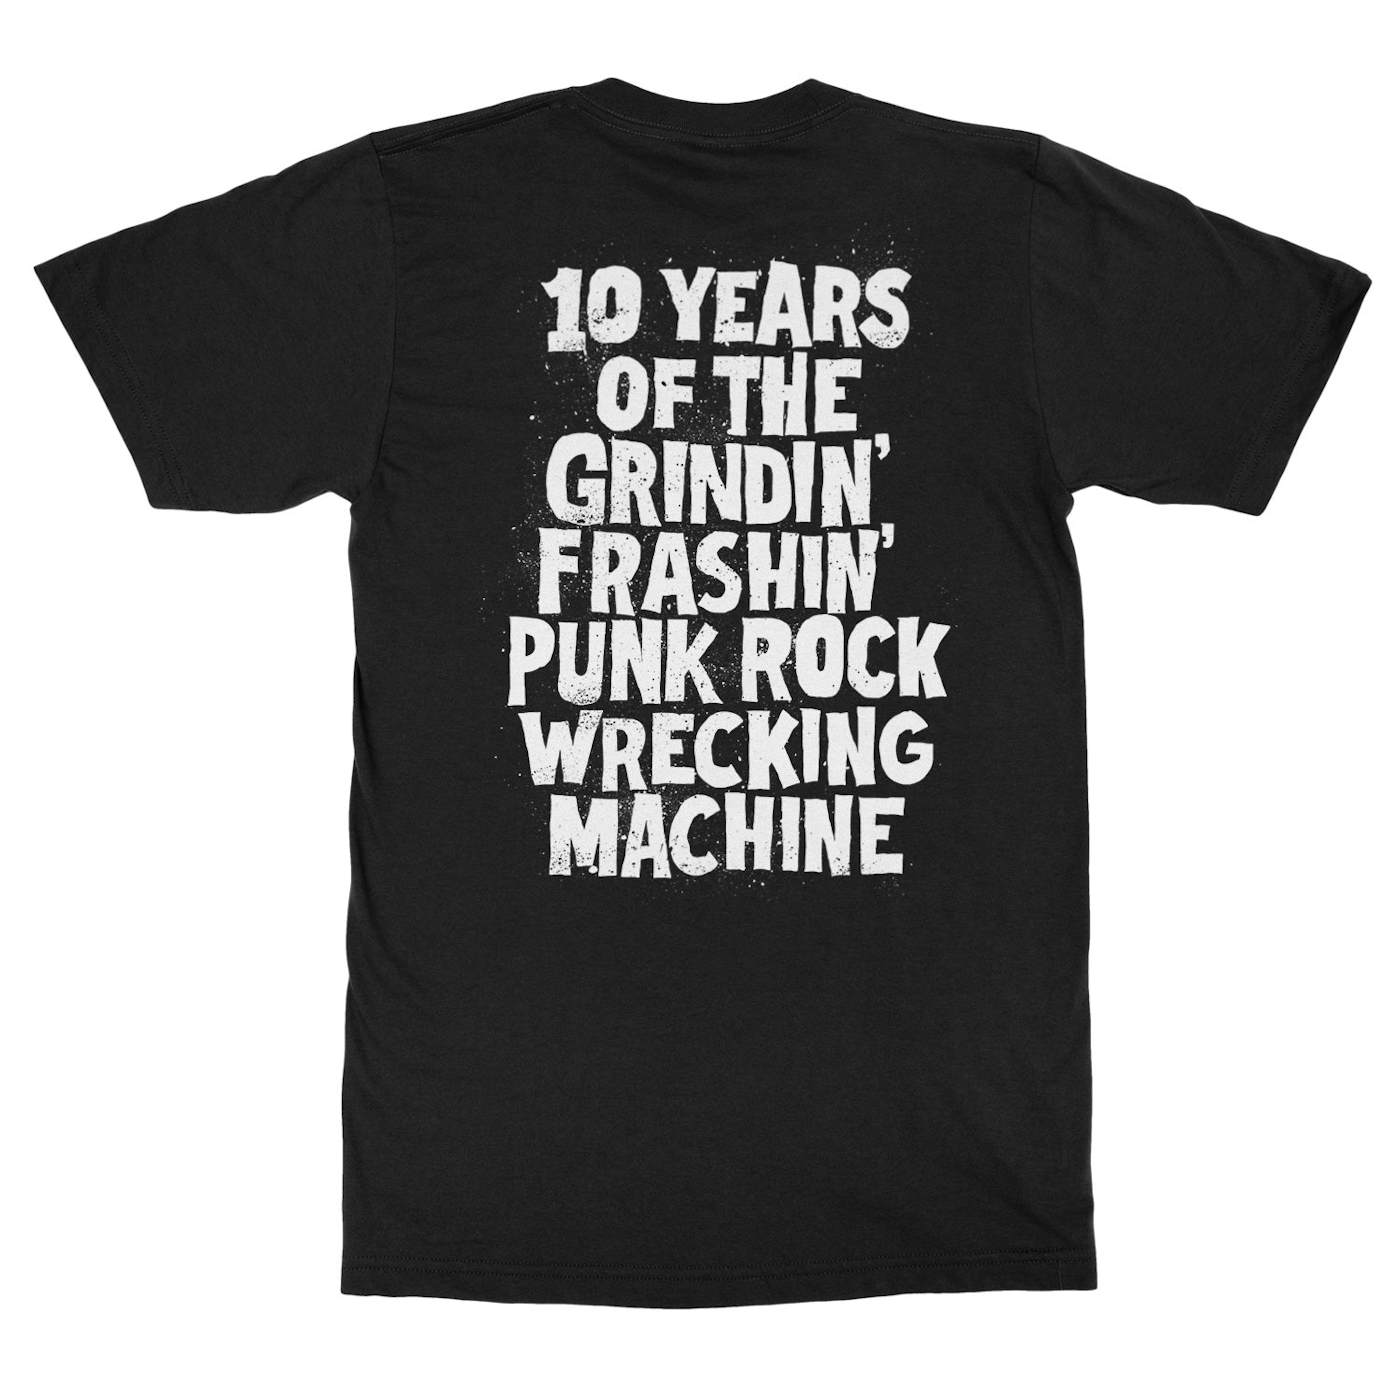 King Parrot "10 Years" T-Shirt